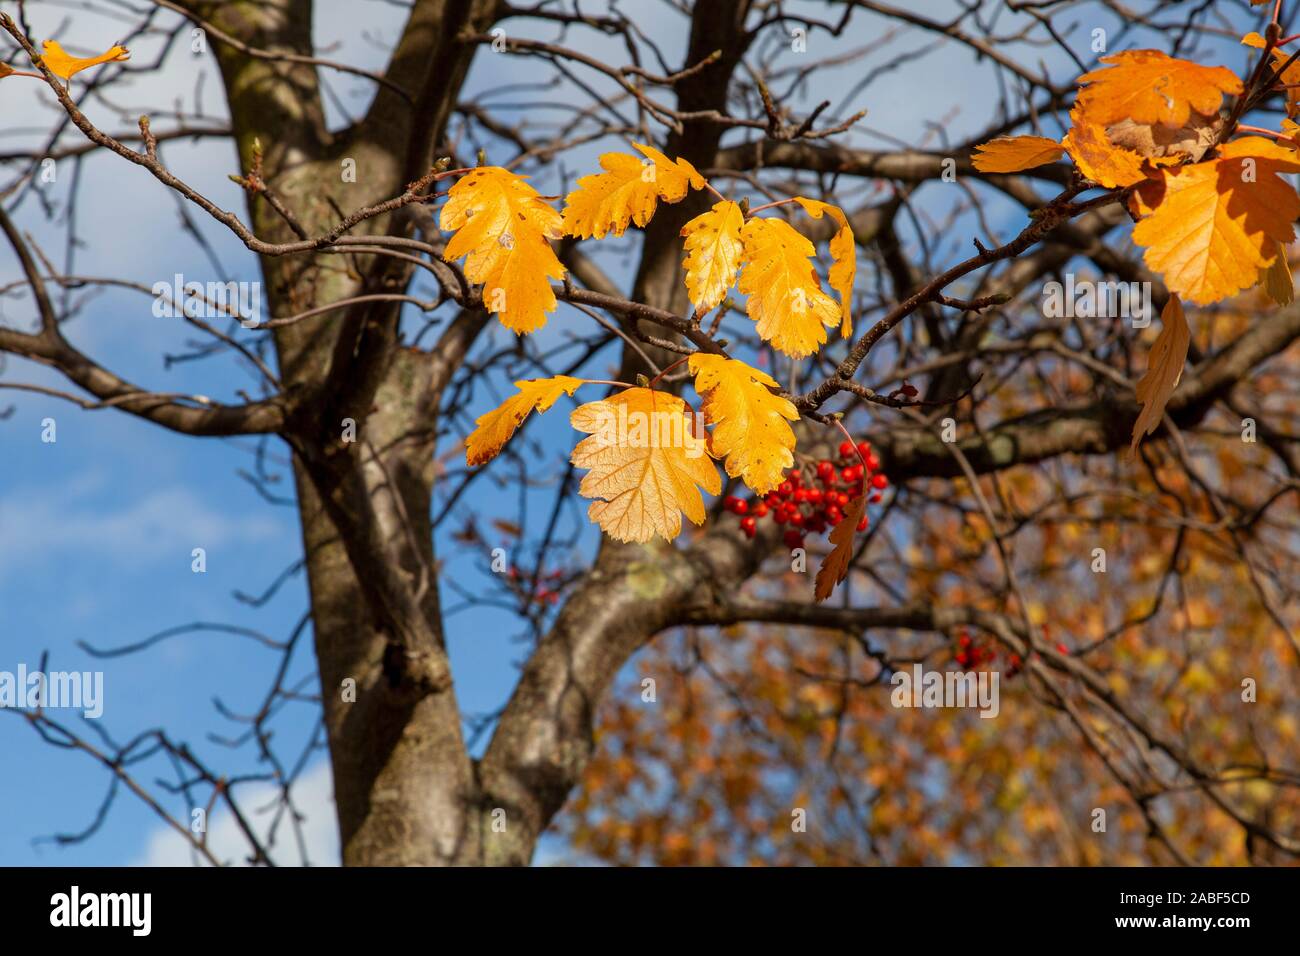 A few golden autumn leaves cling on together with ripe red berries on to a Swedish Whitebeam (Sorbus x intermedia) street tree, Peckham, London, UK Stock Photo